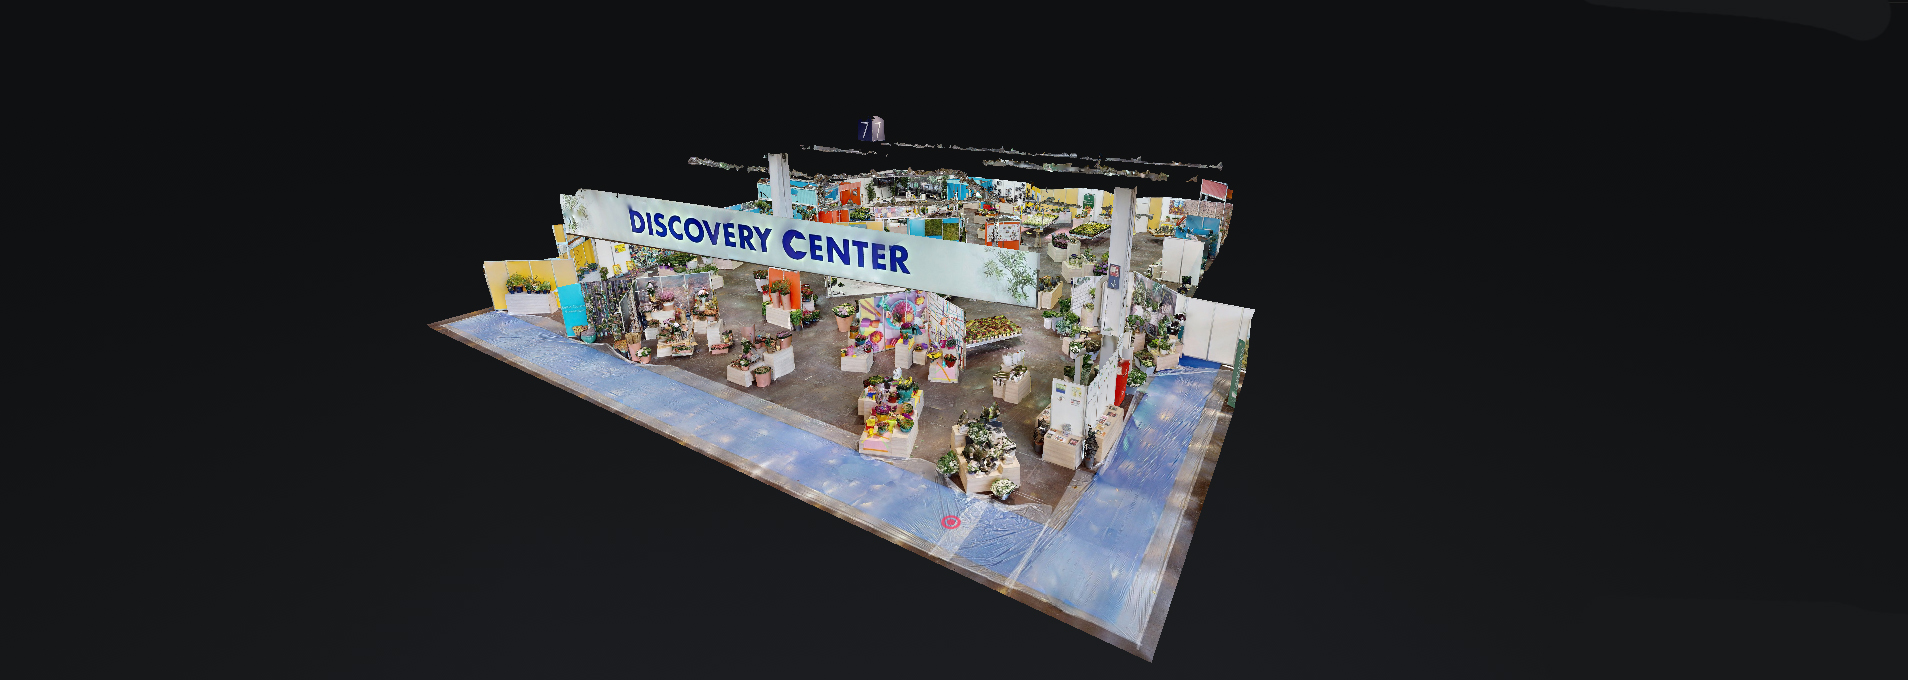 IPM Summer Edition: 
		IPM Discovery Center_Showroom
	